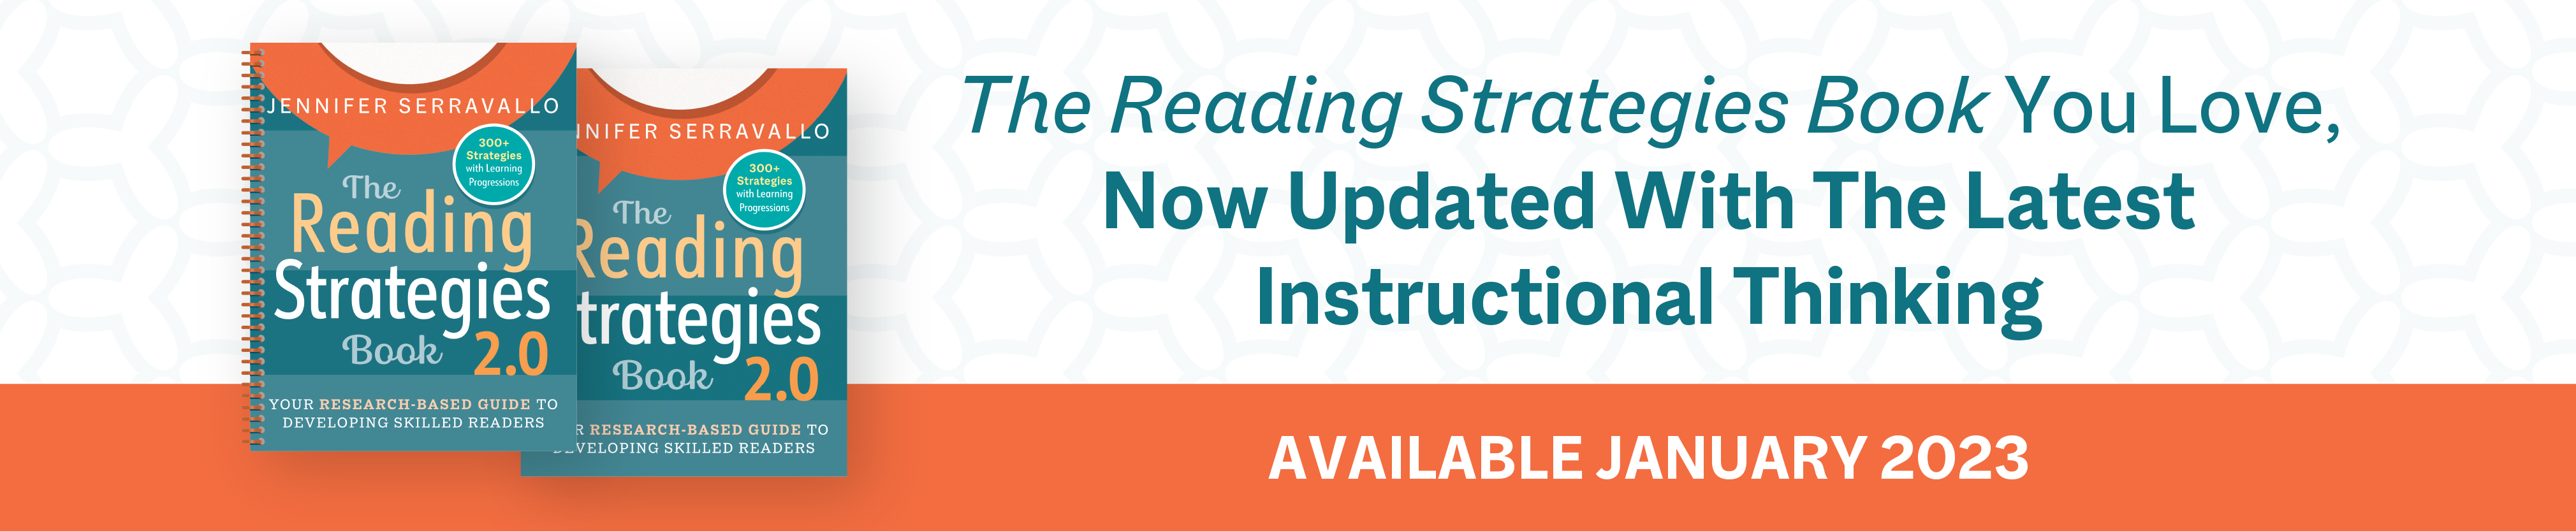 Text that reads "The Reading Strategies Book You Love, Now Updated With The Latest Instructional Thinking. Available January 2023". To The right there are two images of The Reading Strategies Book 2.0. They are spiral bound. 